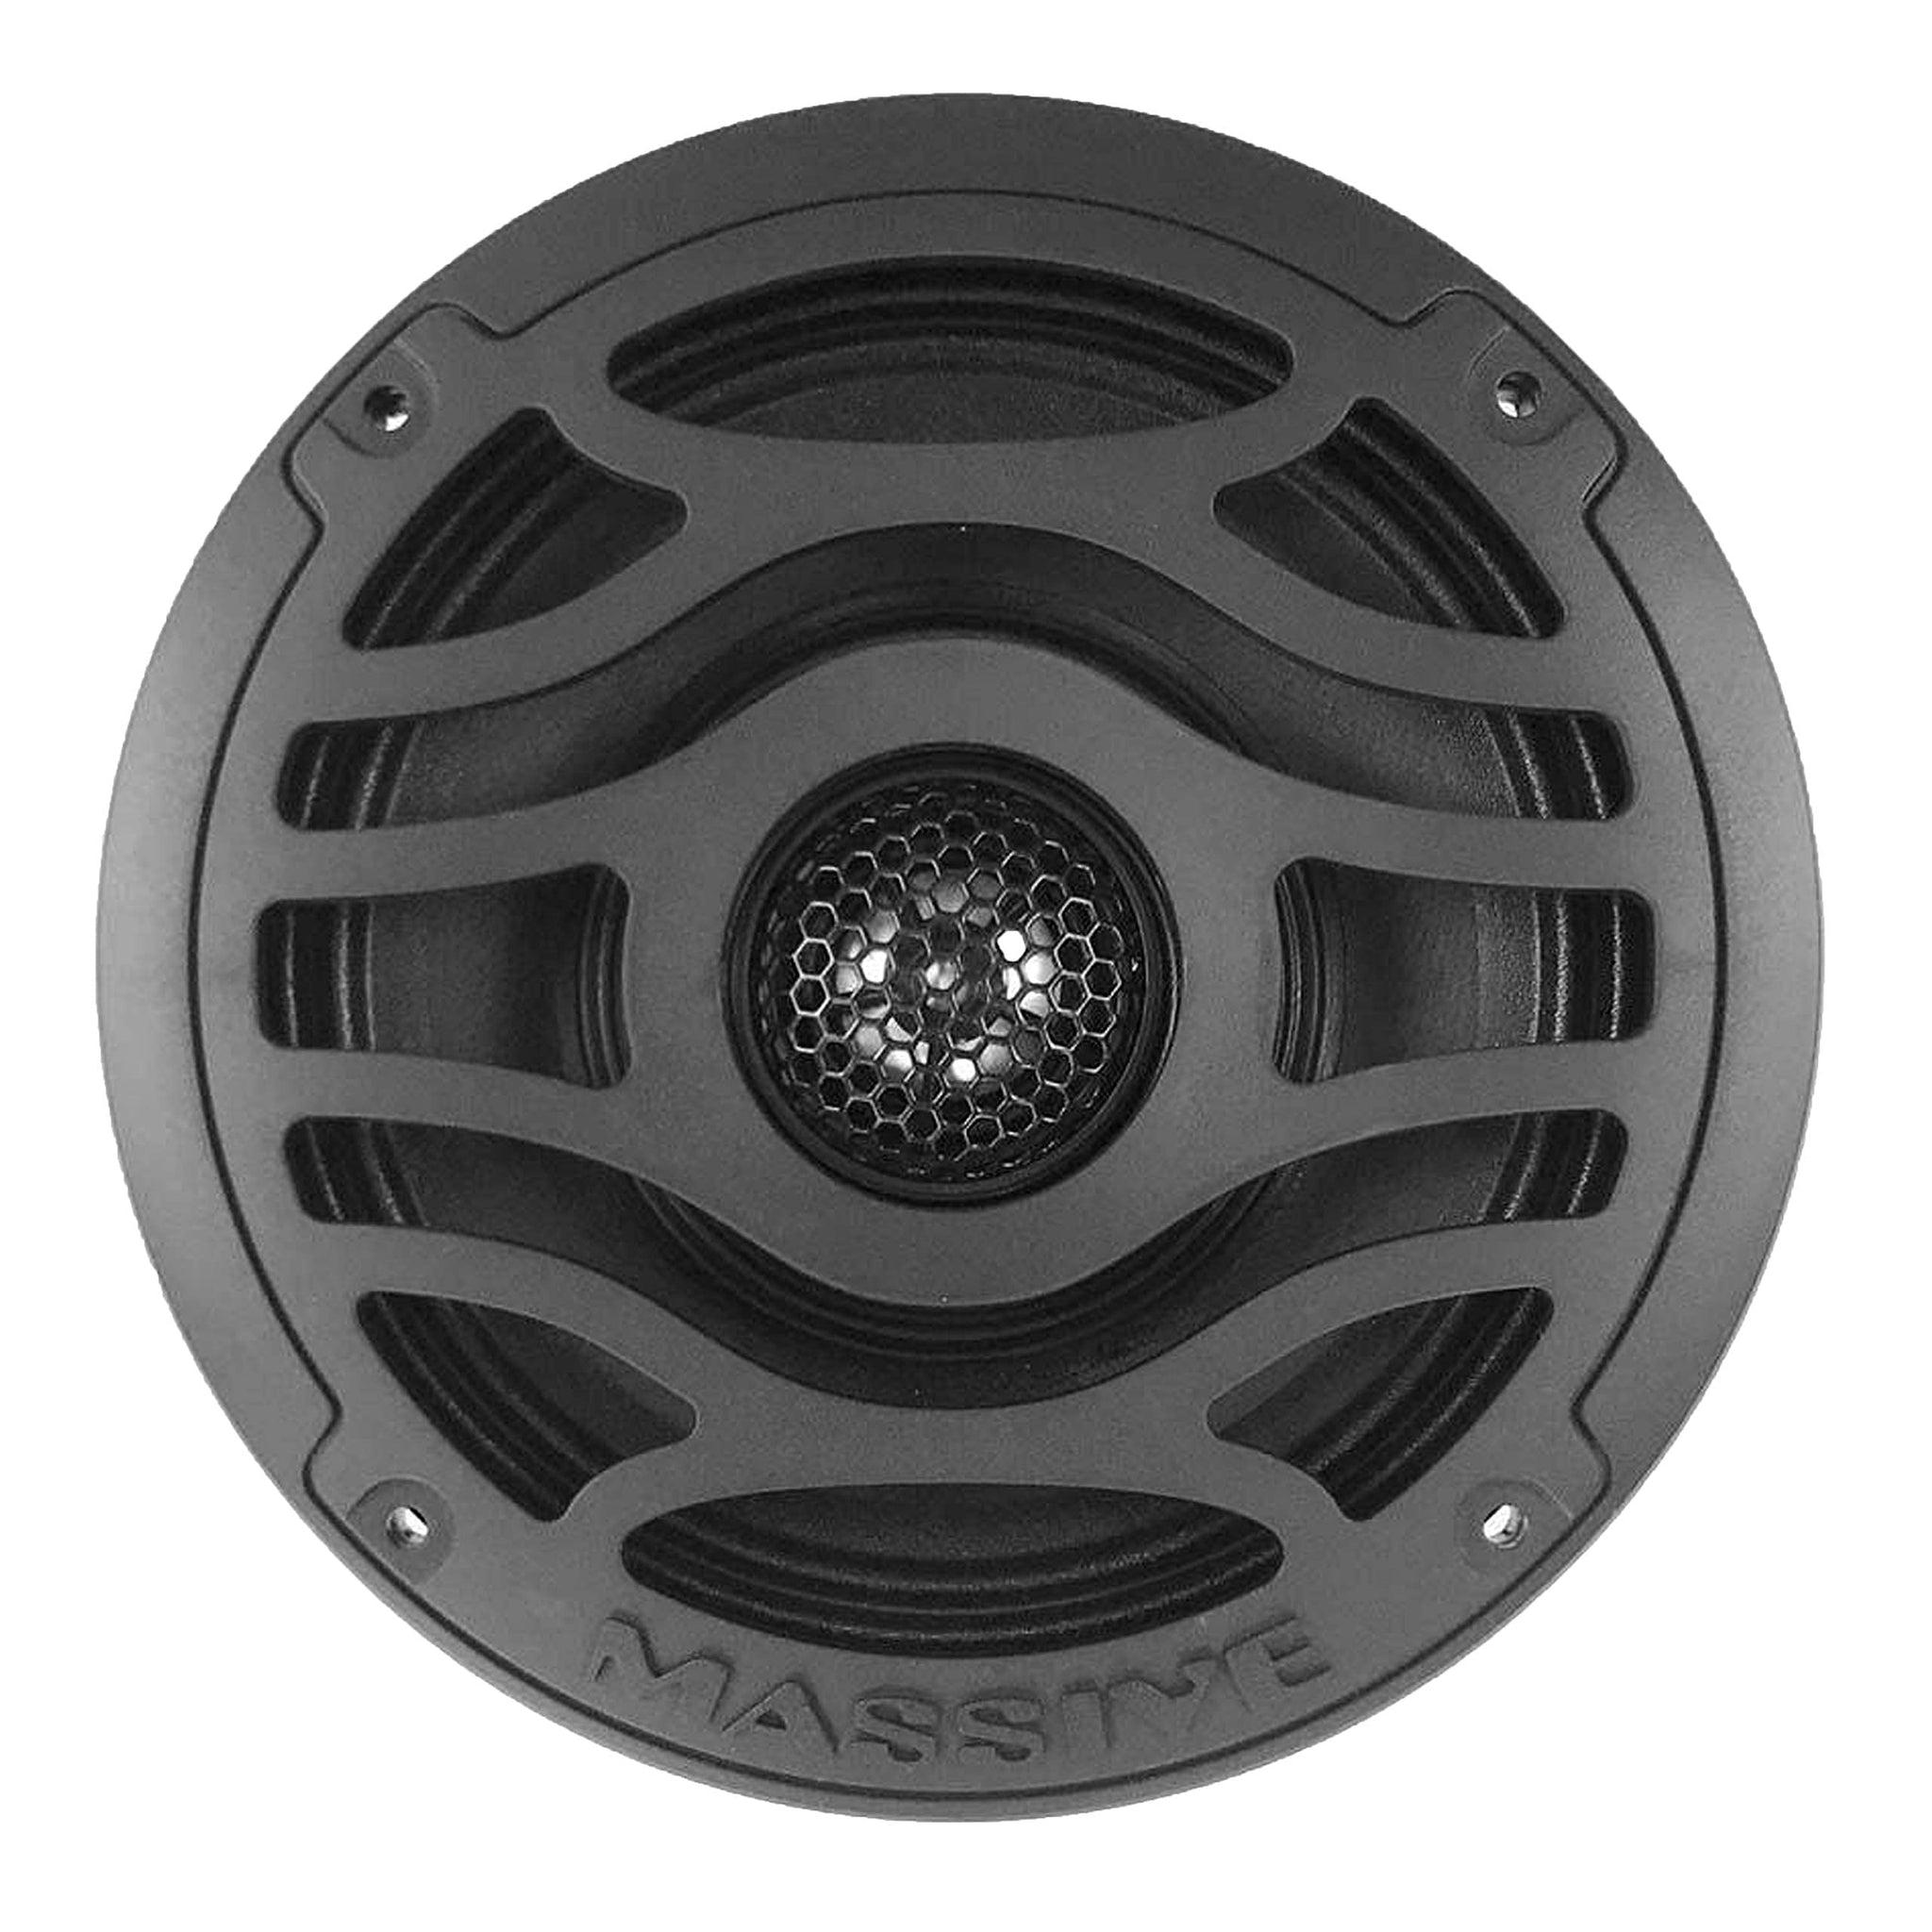 T65X - Massive Audio 6.5 Inch 120 Watts RMS / 480 Watts Peak, Marine Coaxial Speakers for Boats, UTVS, Off Road, Golf Carts, Motorcycles, Runabouts. Sold As Pair